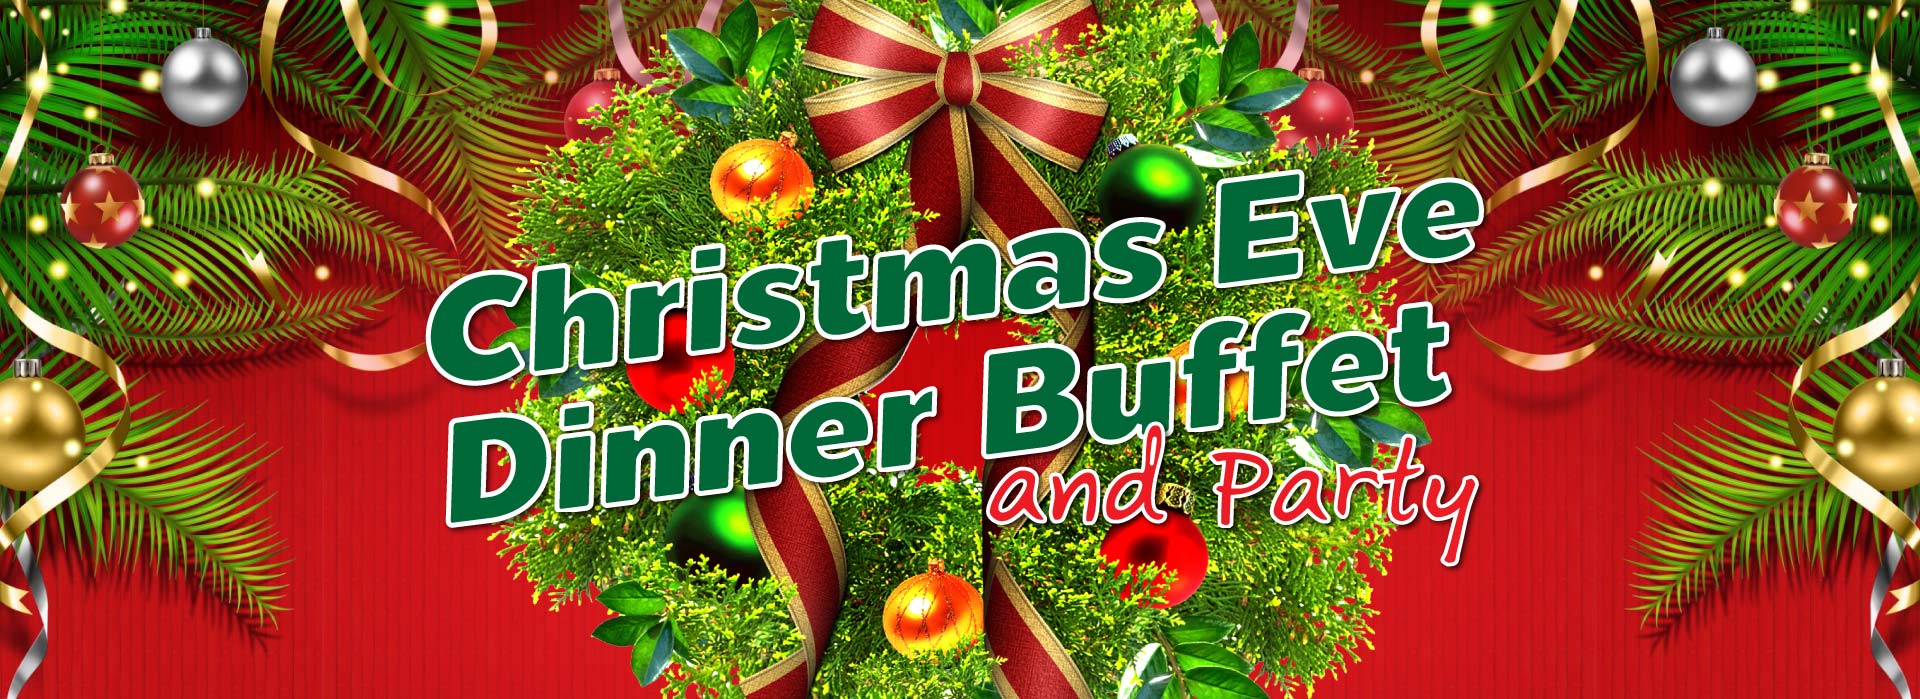 Christmas Eve Dinner Buffet and Party